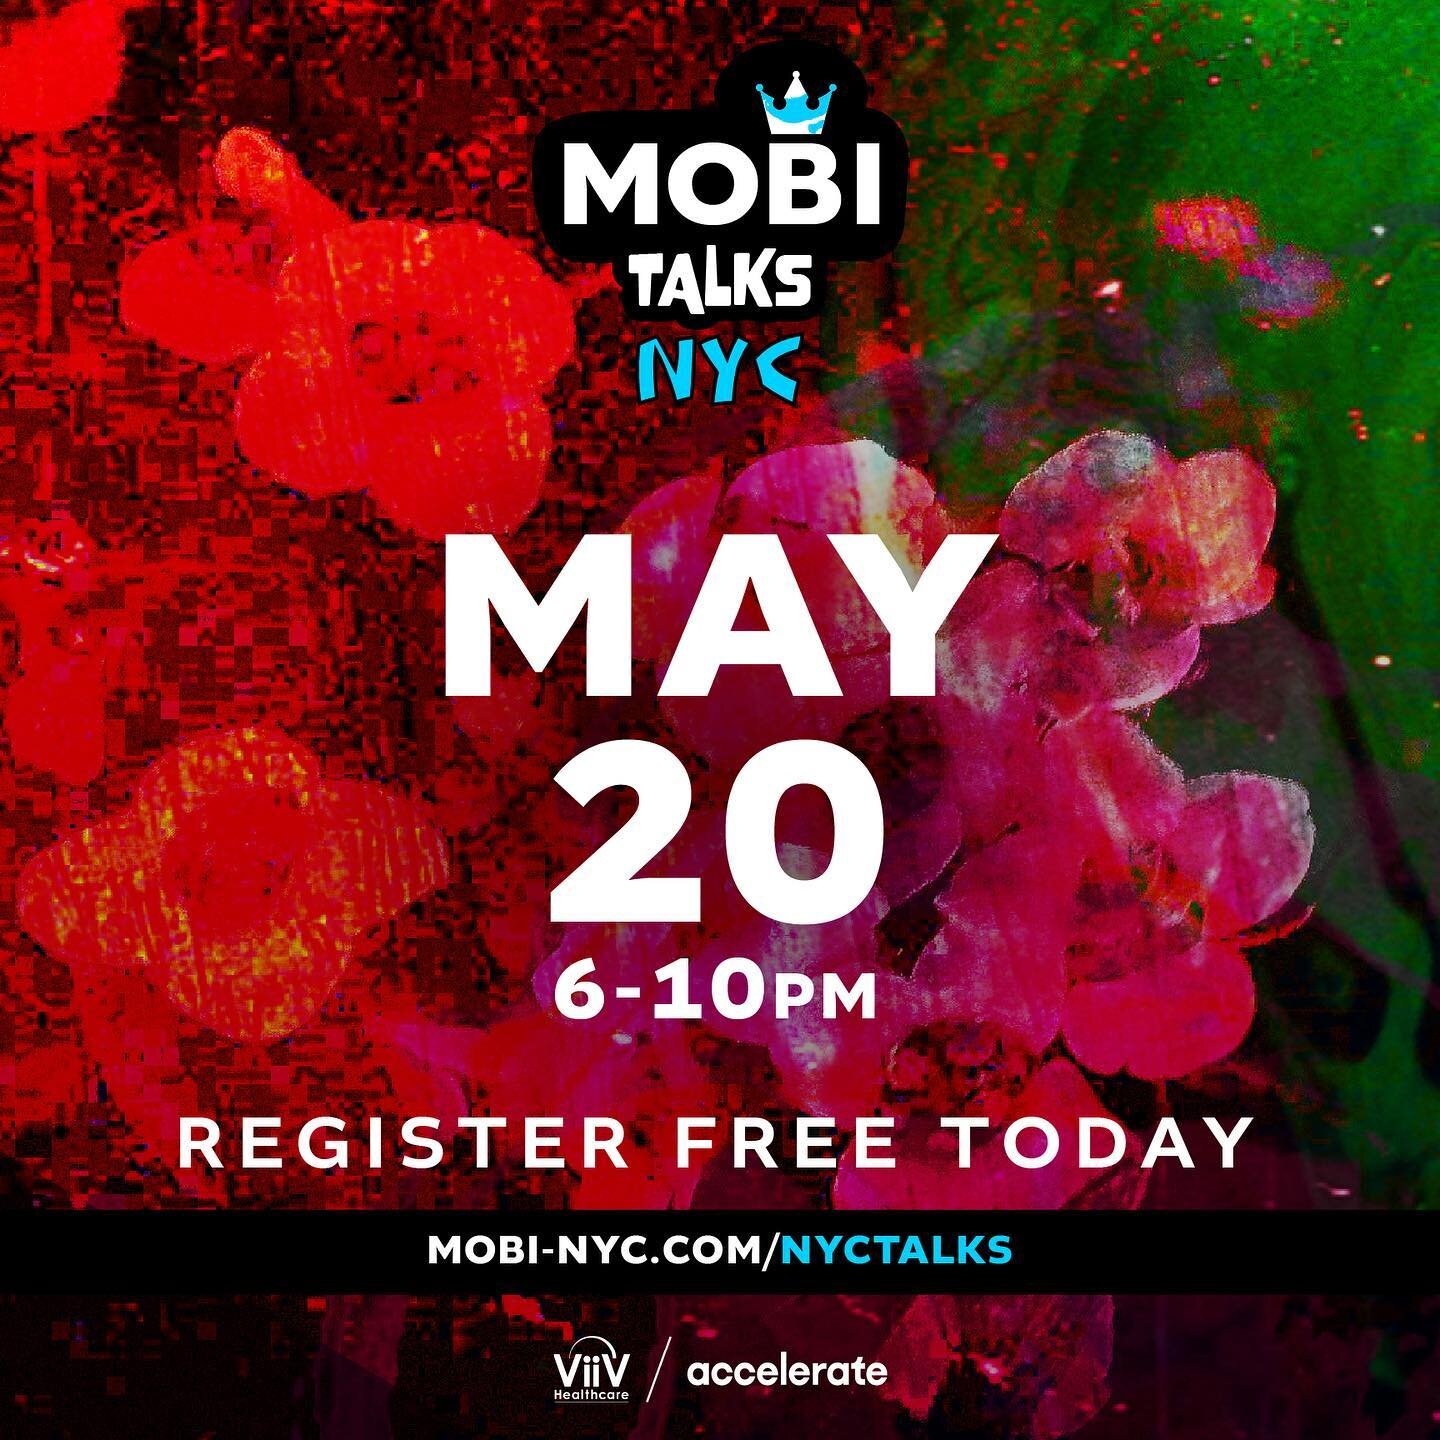 Have you tapped into the NYC talk? 😼😌
Can&rsquo;t wait to see familiar faces and NEW ones too! 
Don&rsquo;t miss the conversation! ✨

REGISTRATION LIVE 🙌🏾👨🏾&zwj;💻
mobi-nyc.com/nyctalks

#community #conversation #MOBITALKS #register #may #NYC #